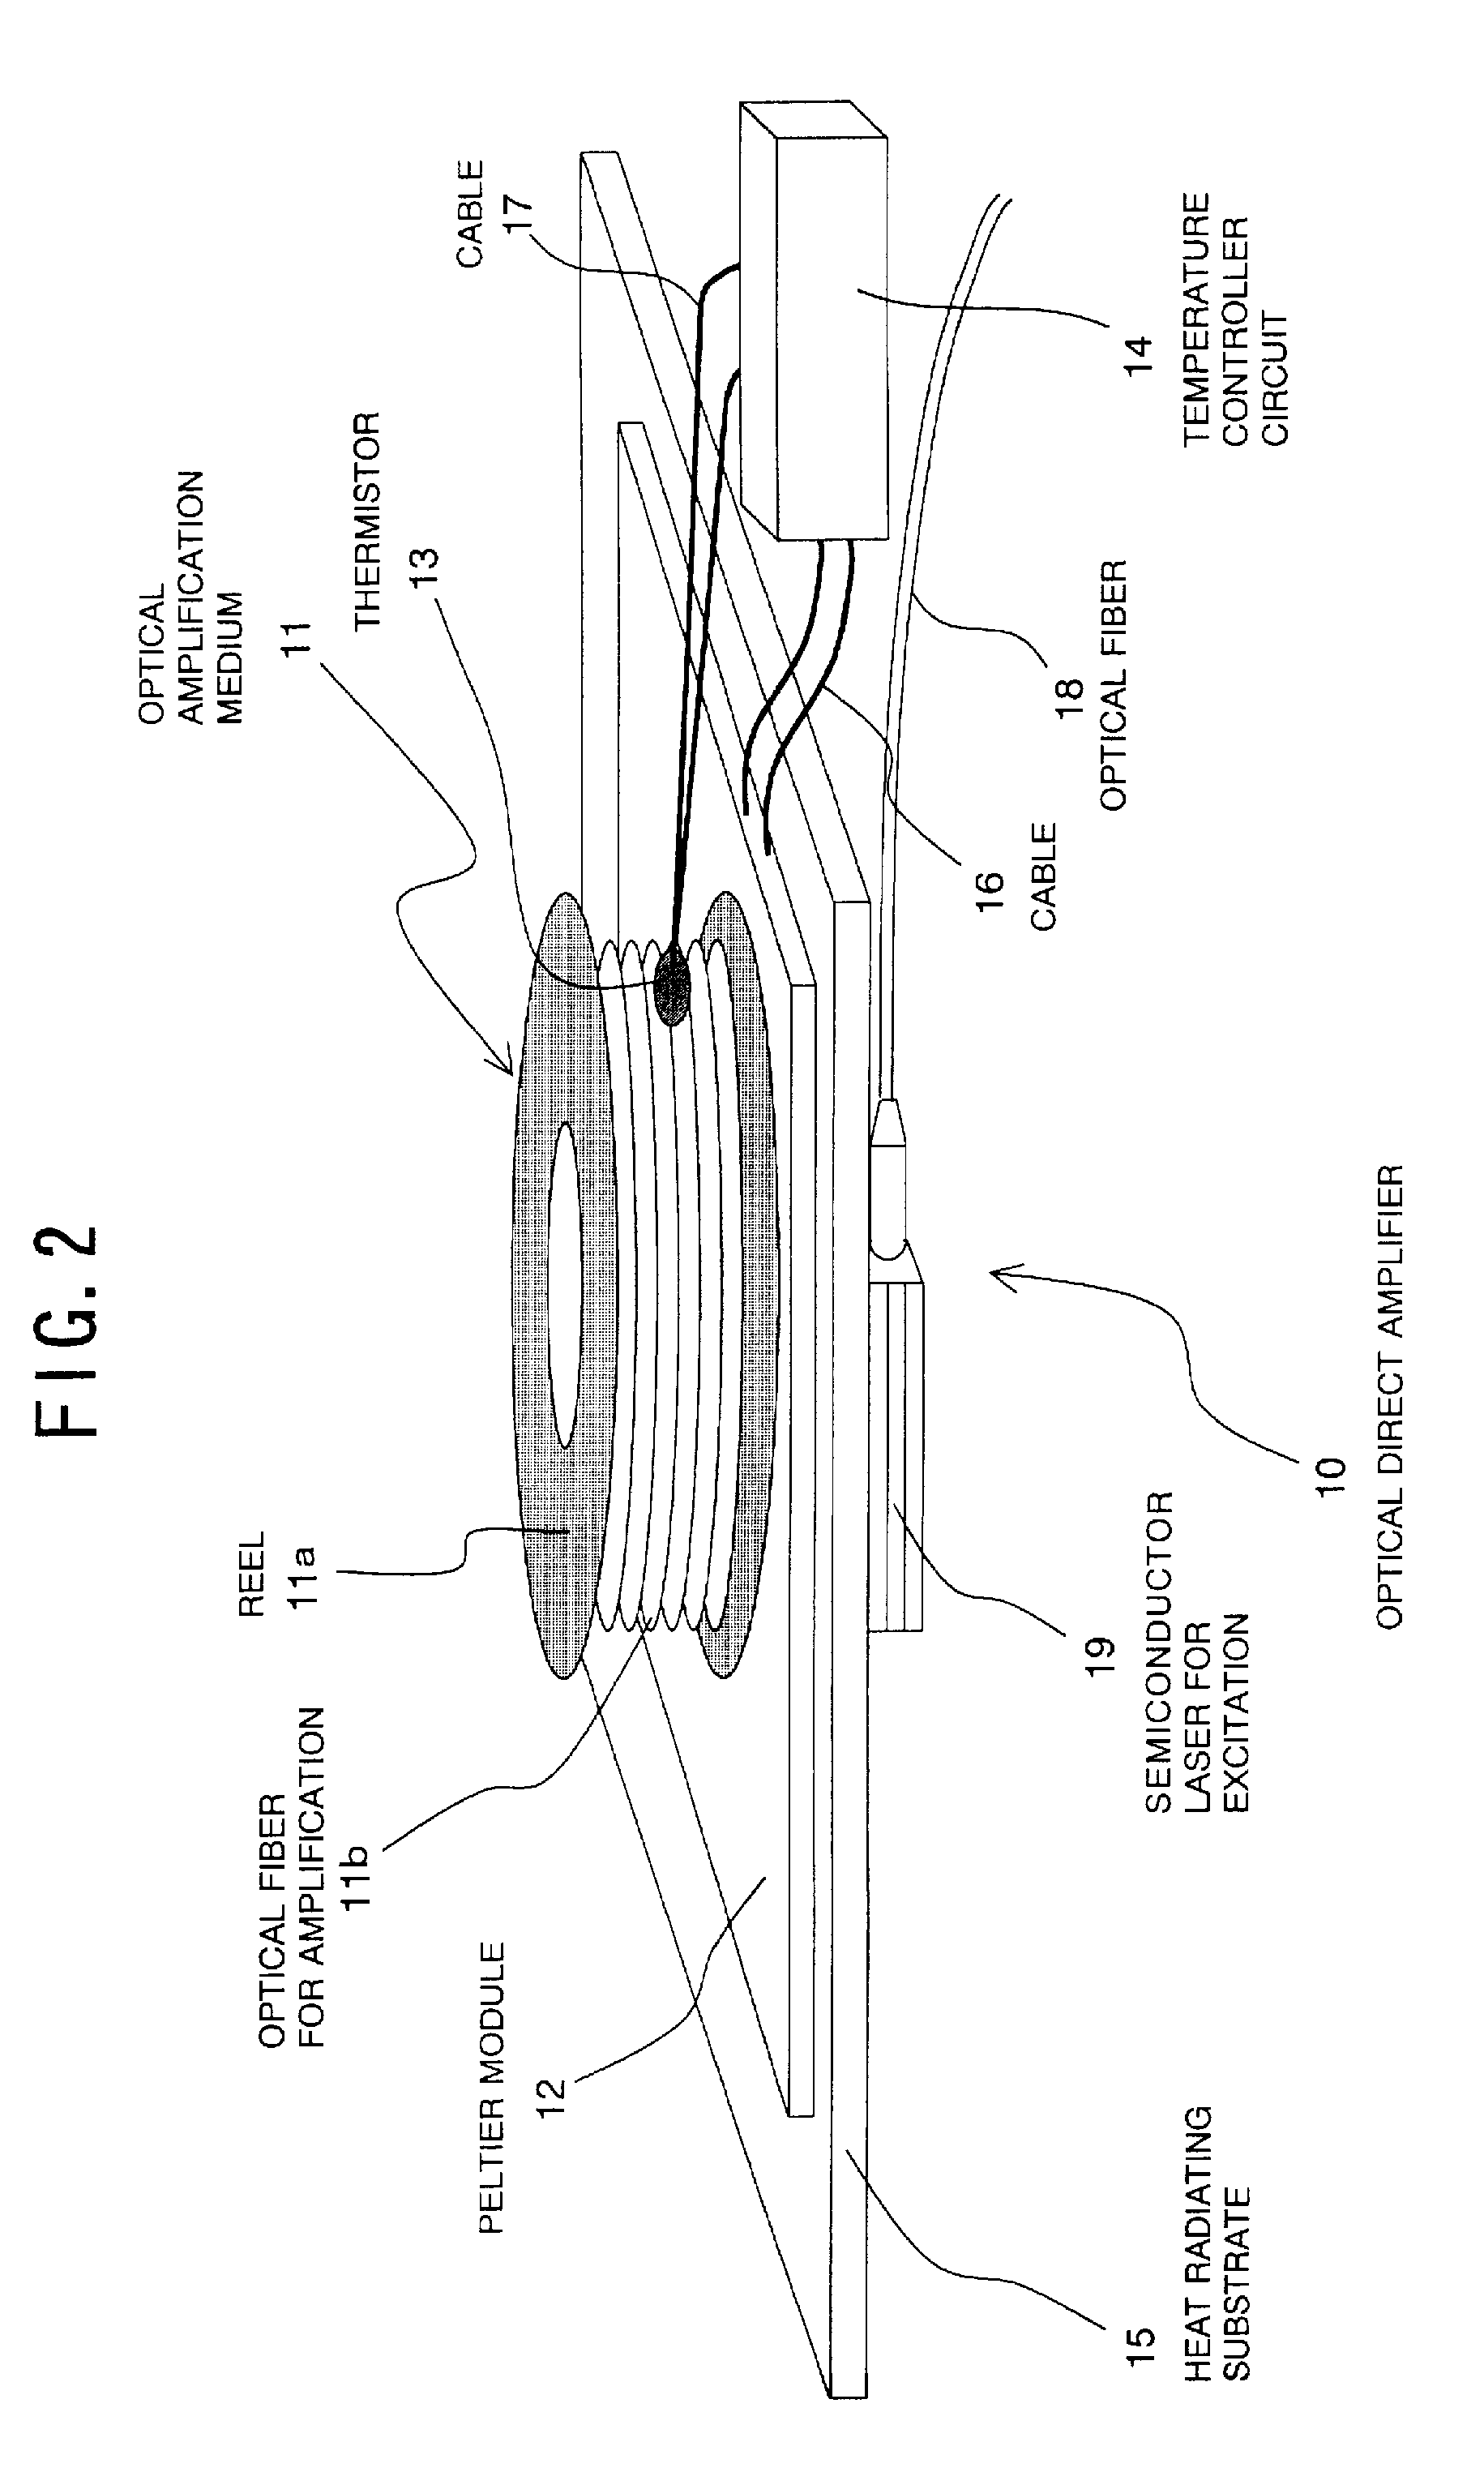 Optical direct amplifier for WDM optical transmission